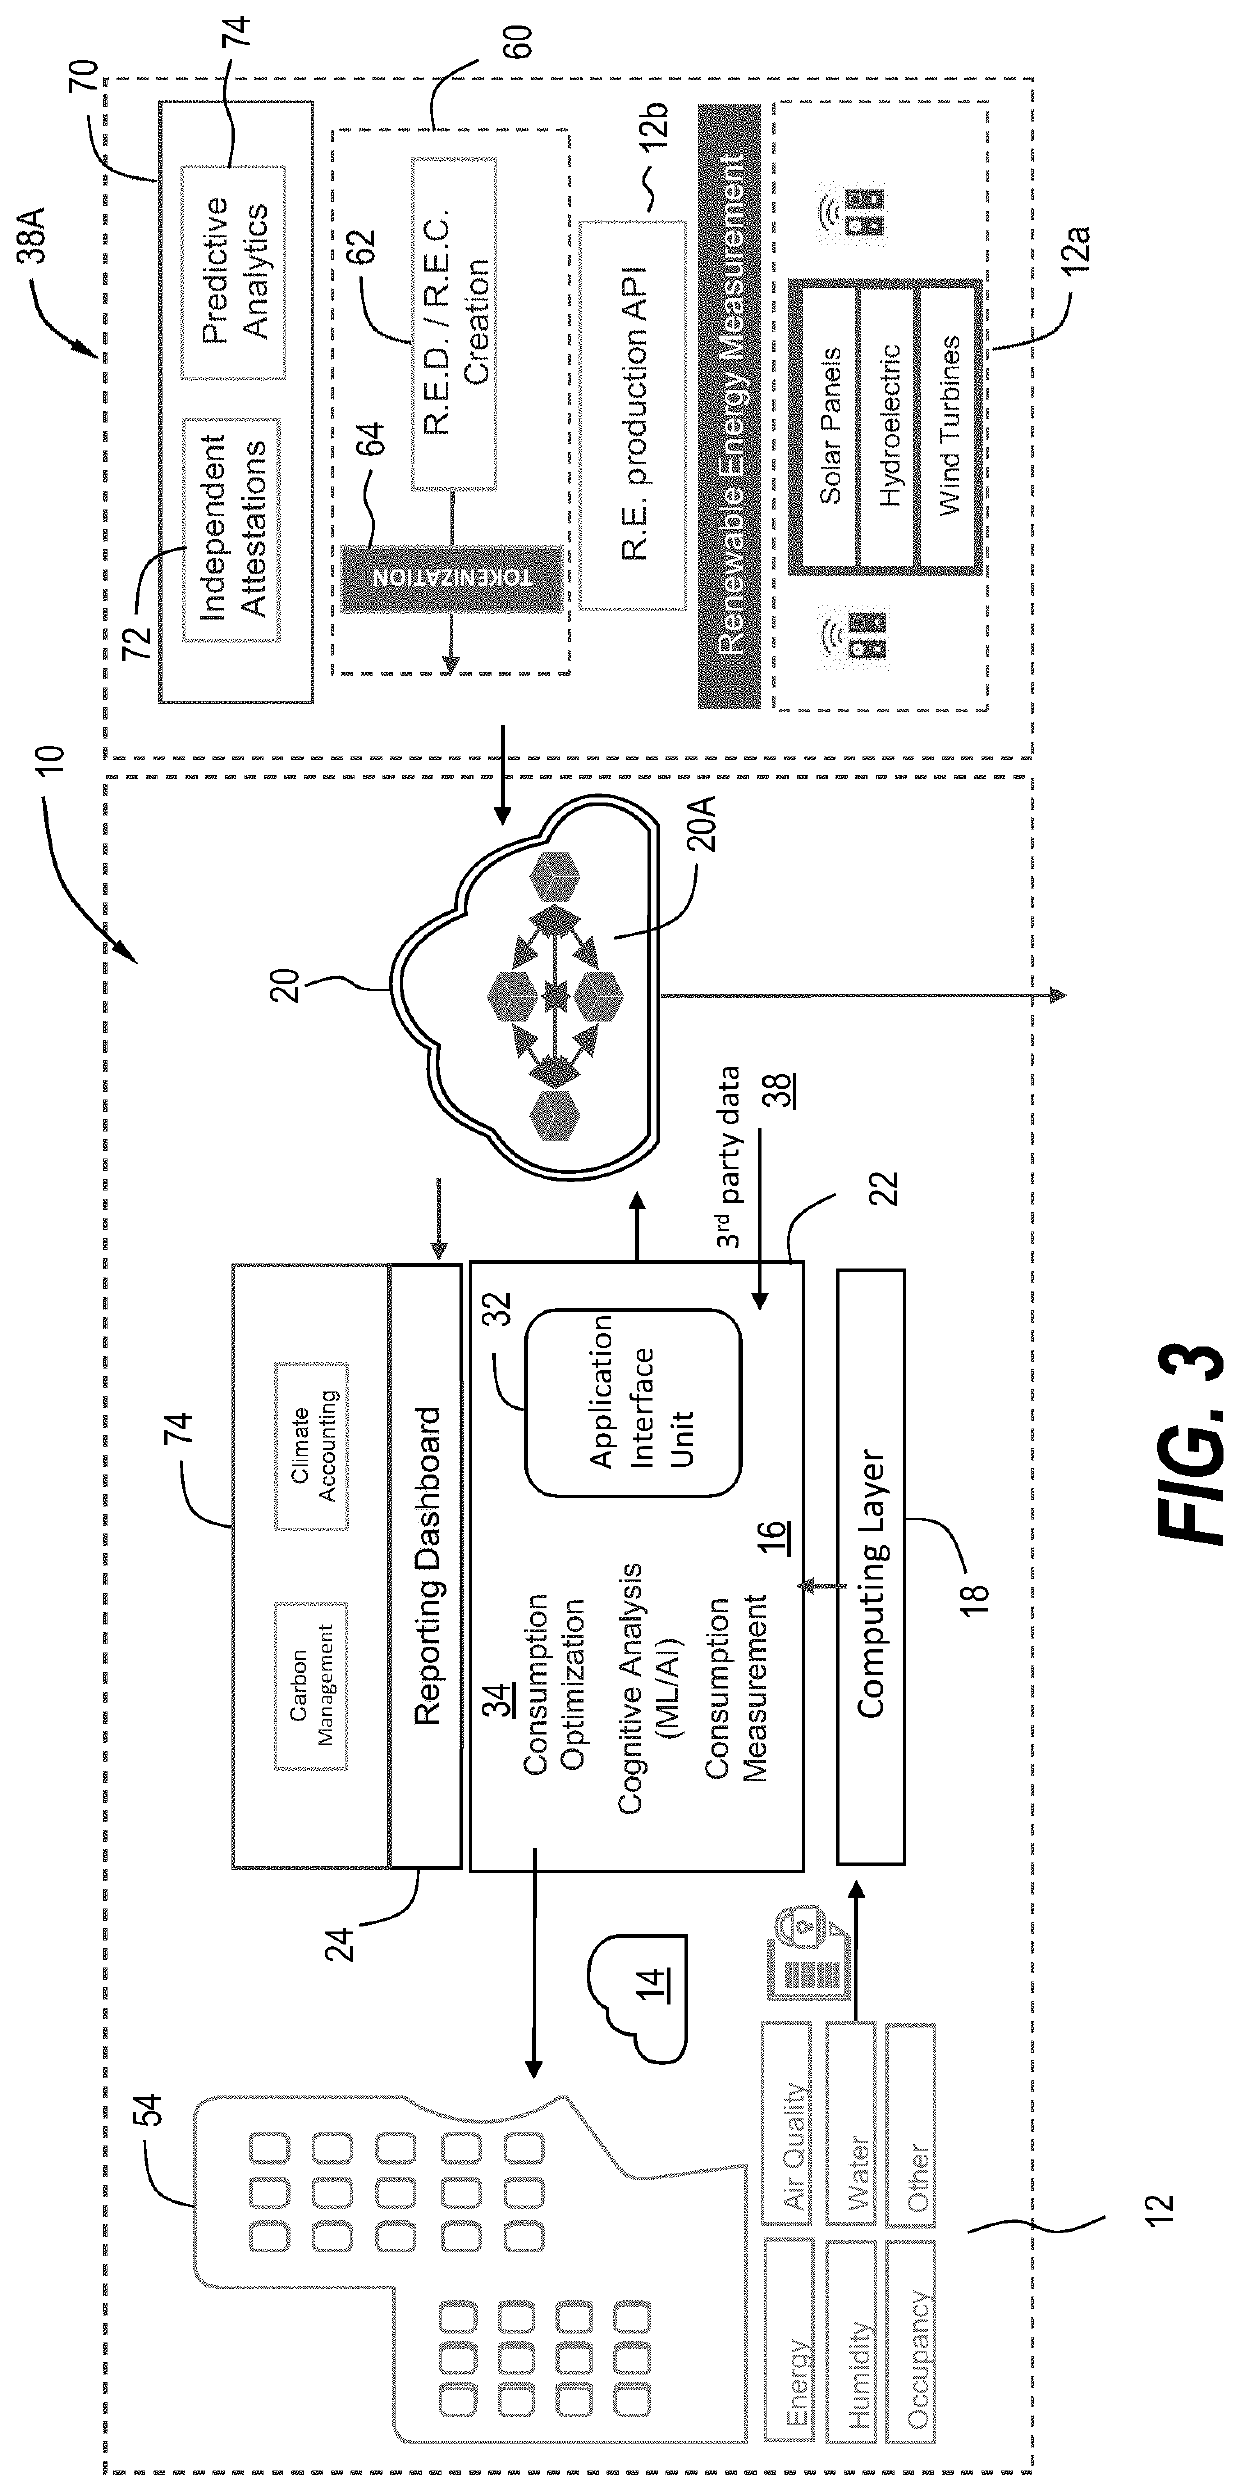 System and method for collecting and storing environmental data in a digital trust model and for determining emissions data therefrom